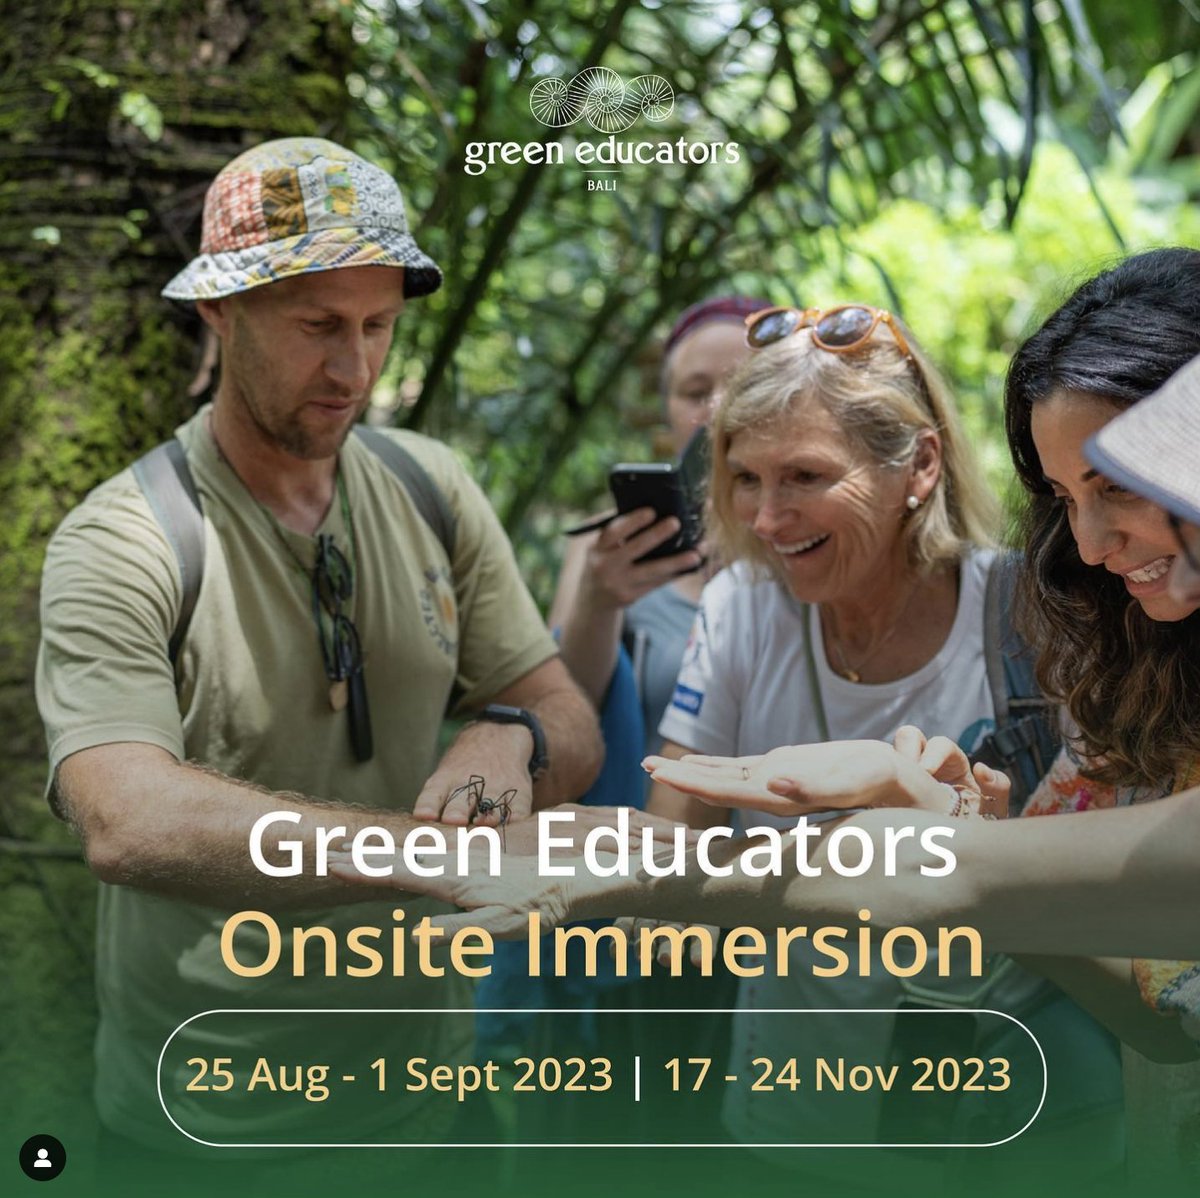 Are you a teacher dreaming of coming to #Bali? Would you 💚 to gather with an engaging & supportive community to help make #education more relevant & sustainable our our ever-evolving world? If so, join our next on-site course 27 Aug - 1 Sep Learn more 👇 lnkd.in/gNsauxa